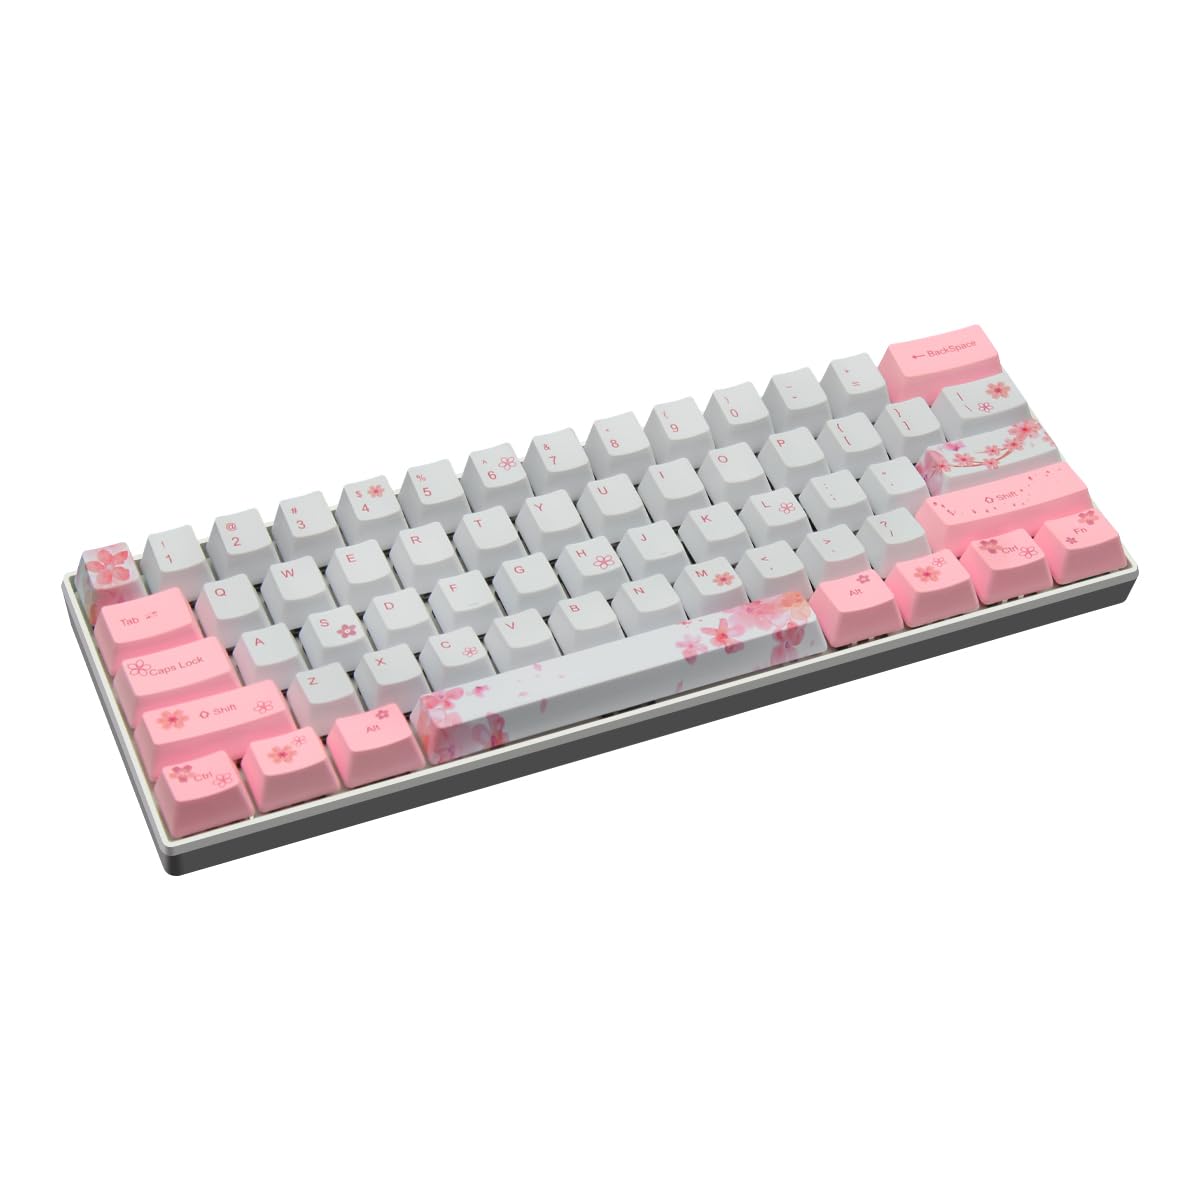 ZMX Mechanical Keyboard Pink Cherry Blossom 61 Keys,Hot Swappable 60％Compact Mechanical 5.0Bluetooth/Type-C Wired Dual-Mode RGB Backlit Dye-Sublimation PBT Keycap Gaming Keyboard(Blue Switch, Pink)